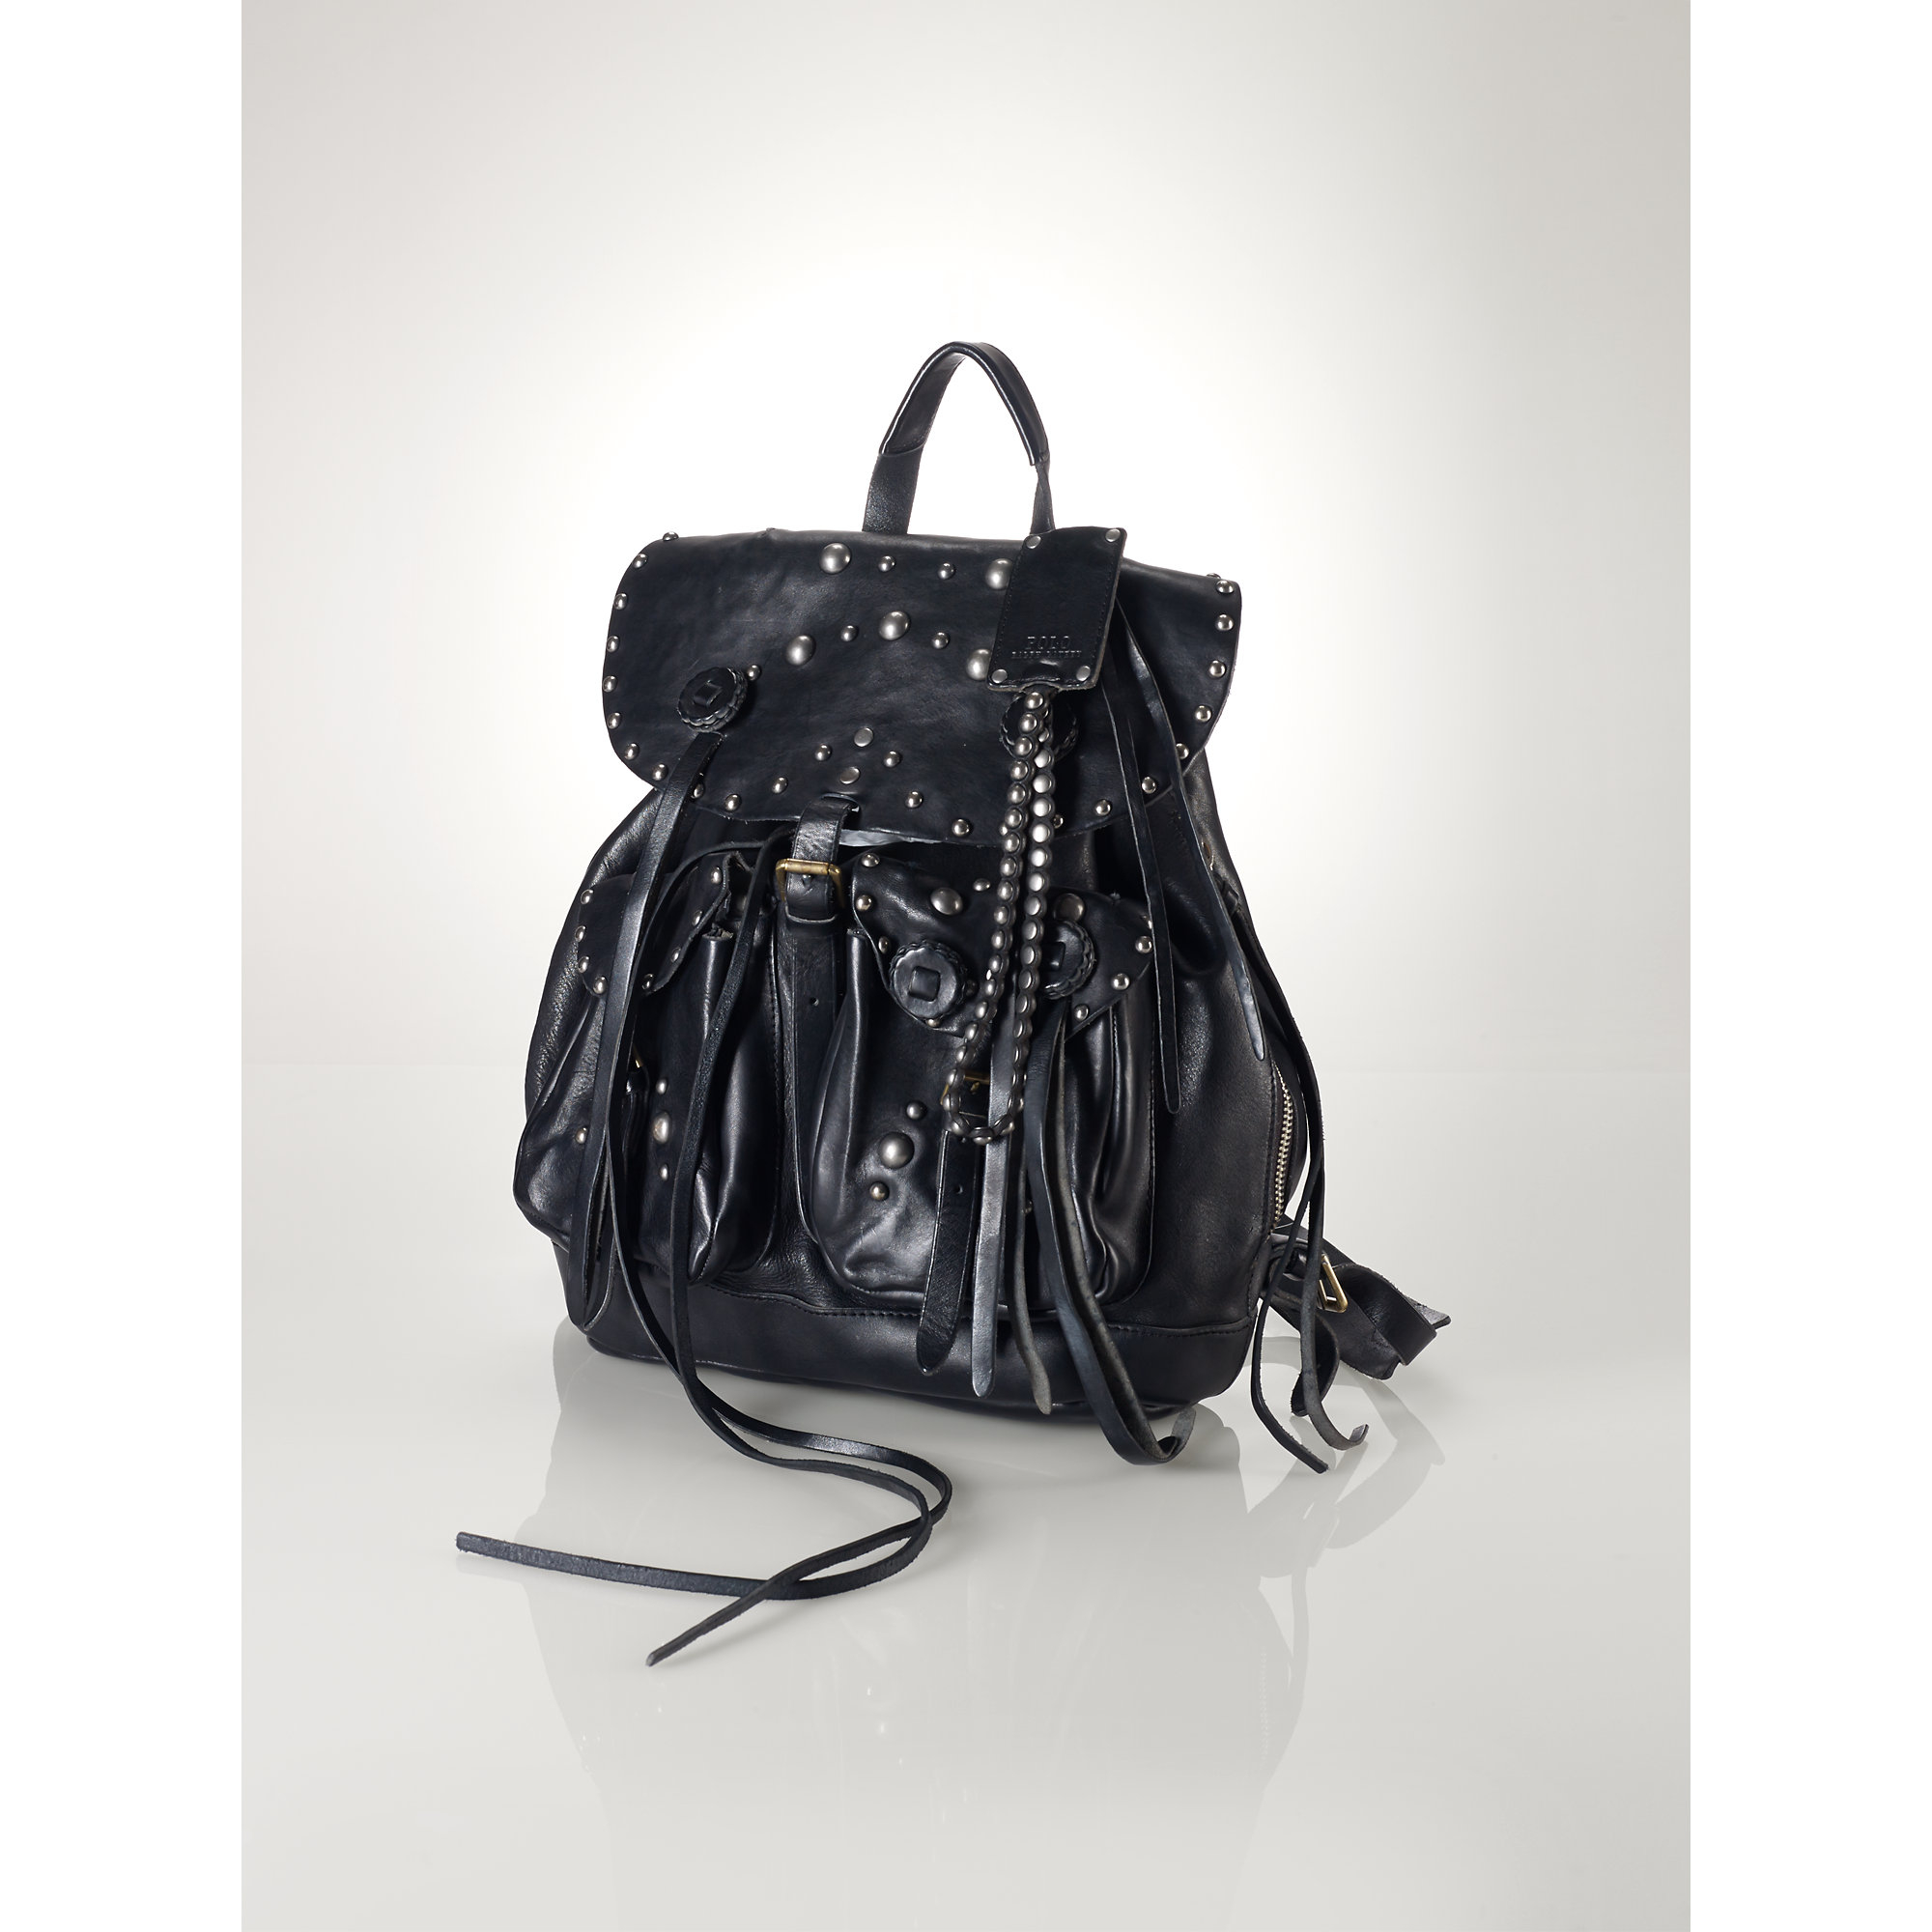 Polo Ralph Lauren Moto Studded Leather Backpack in Black | Lyst